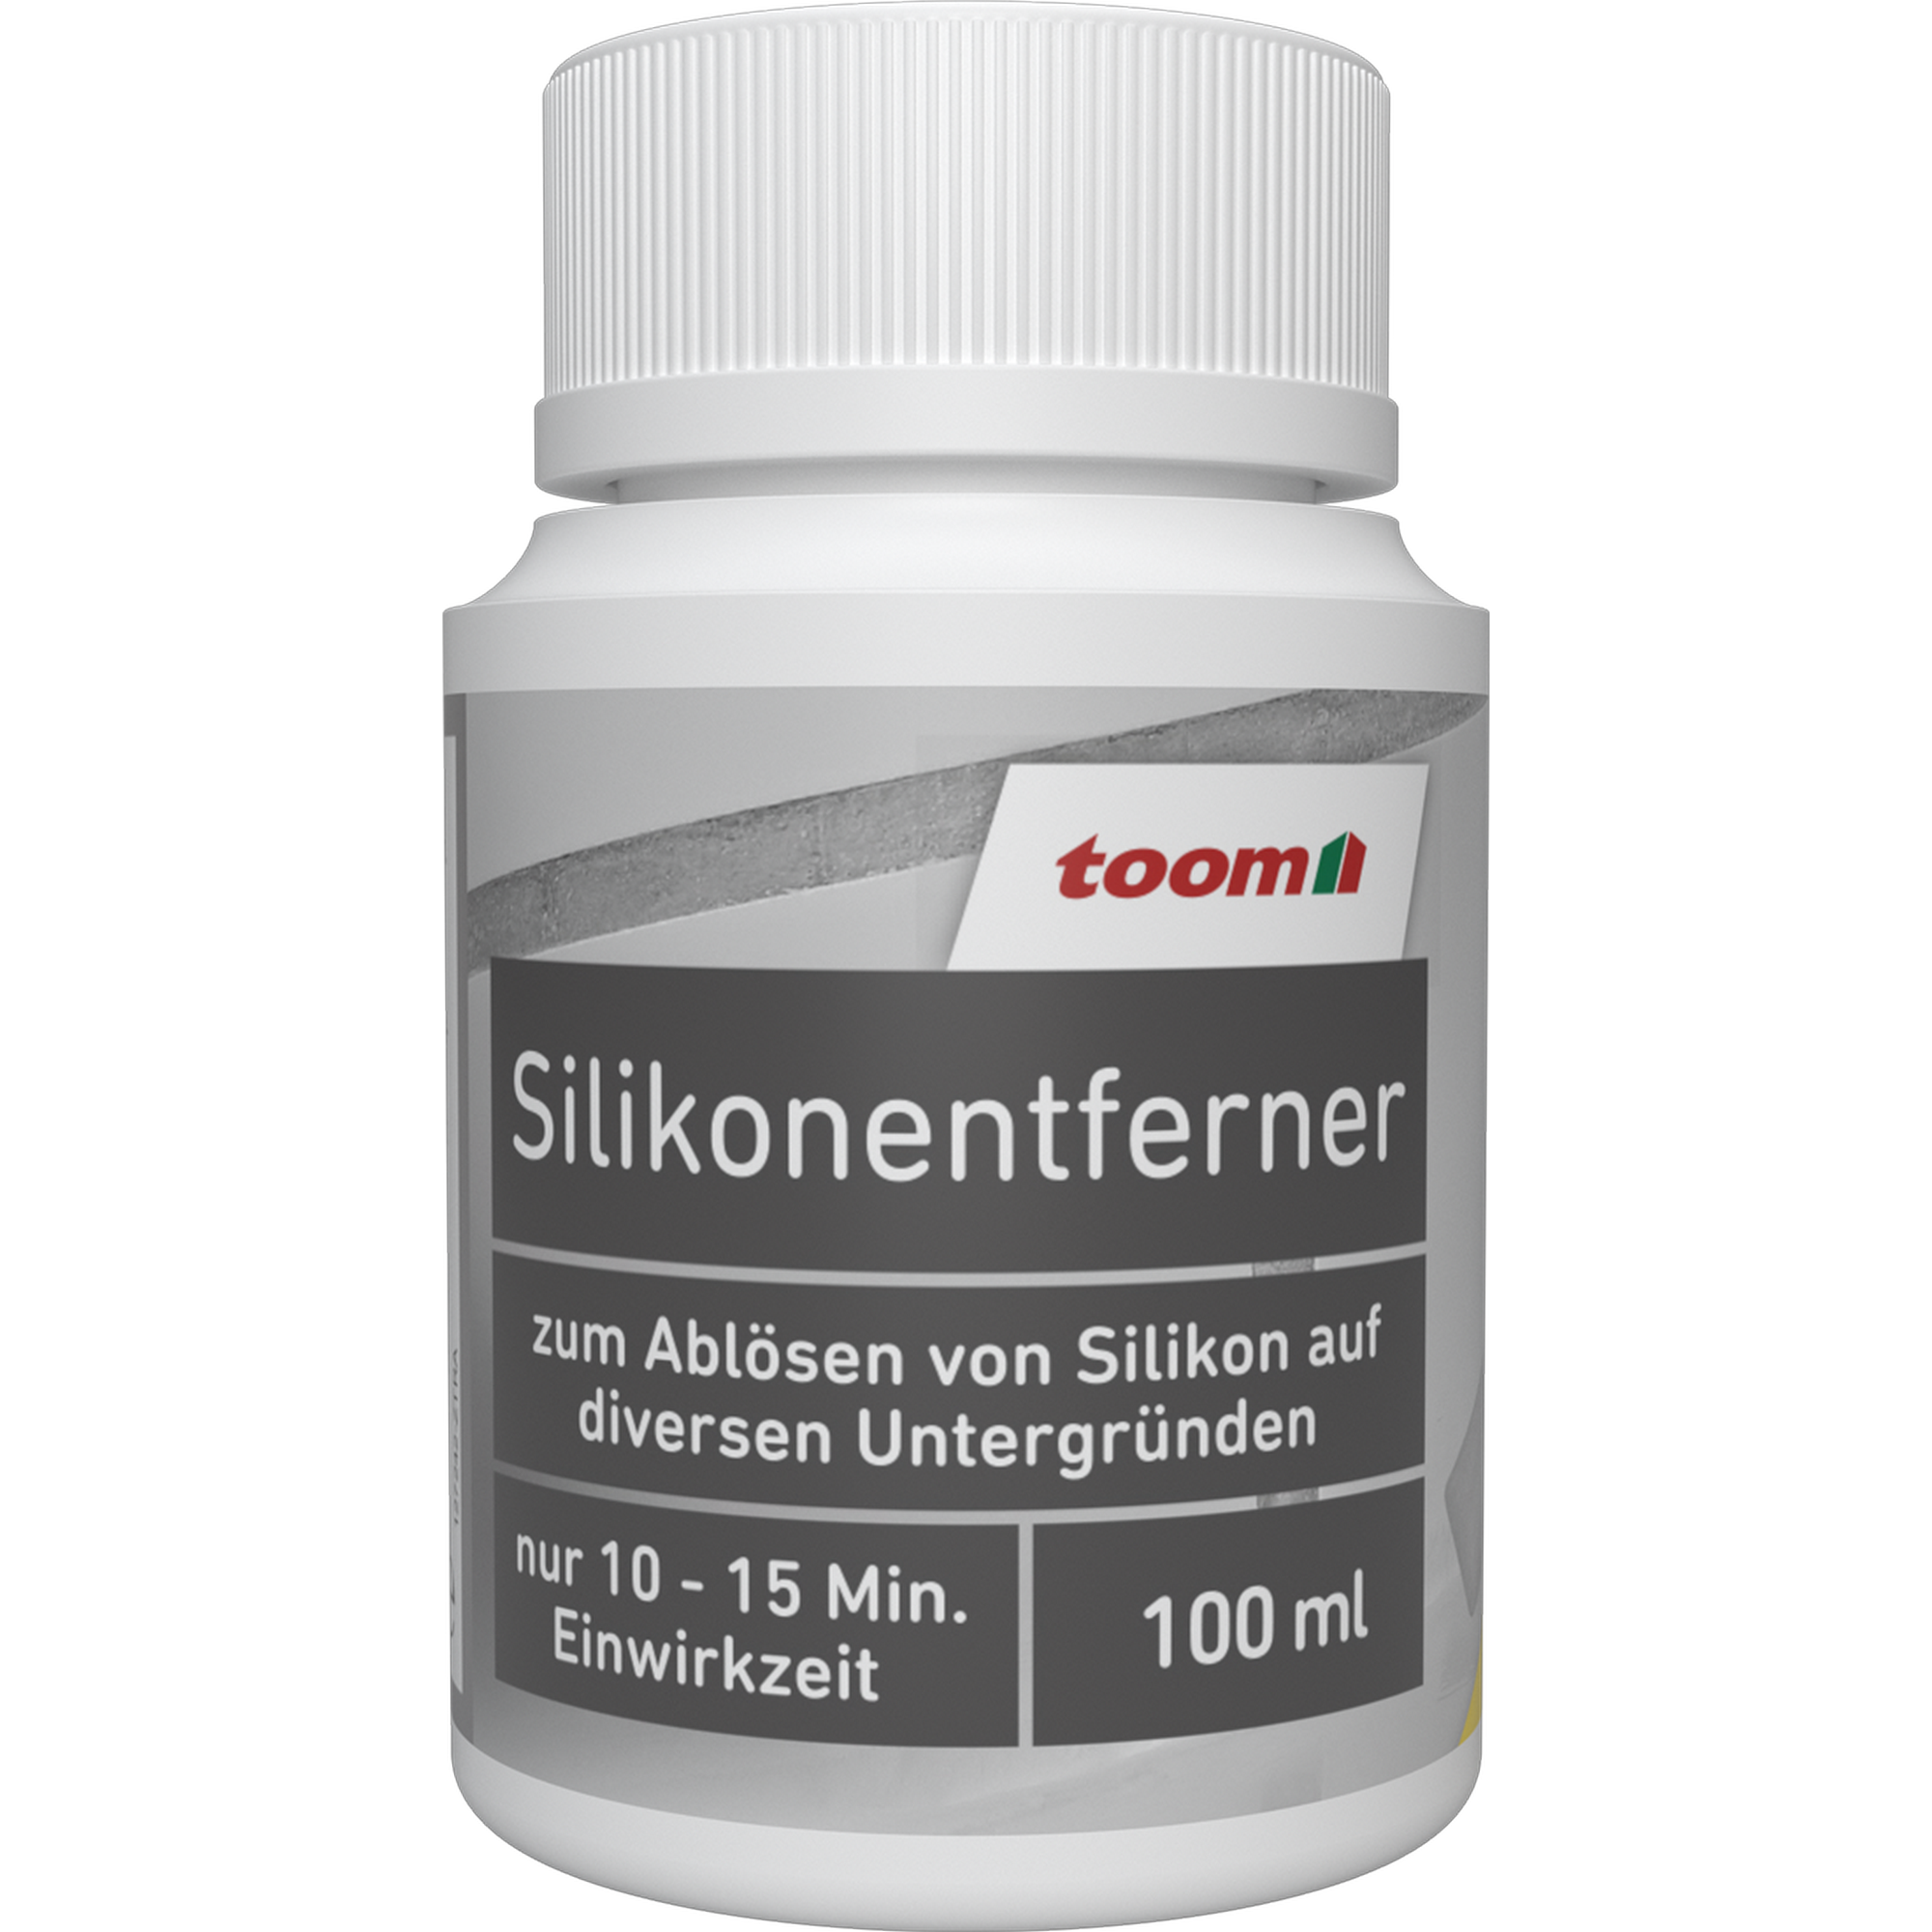 Silikonentferner 100 ml + product picture